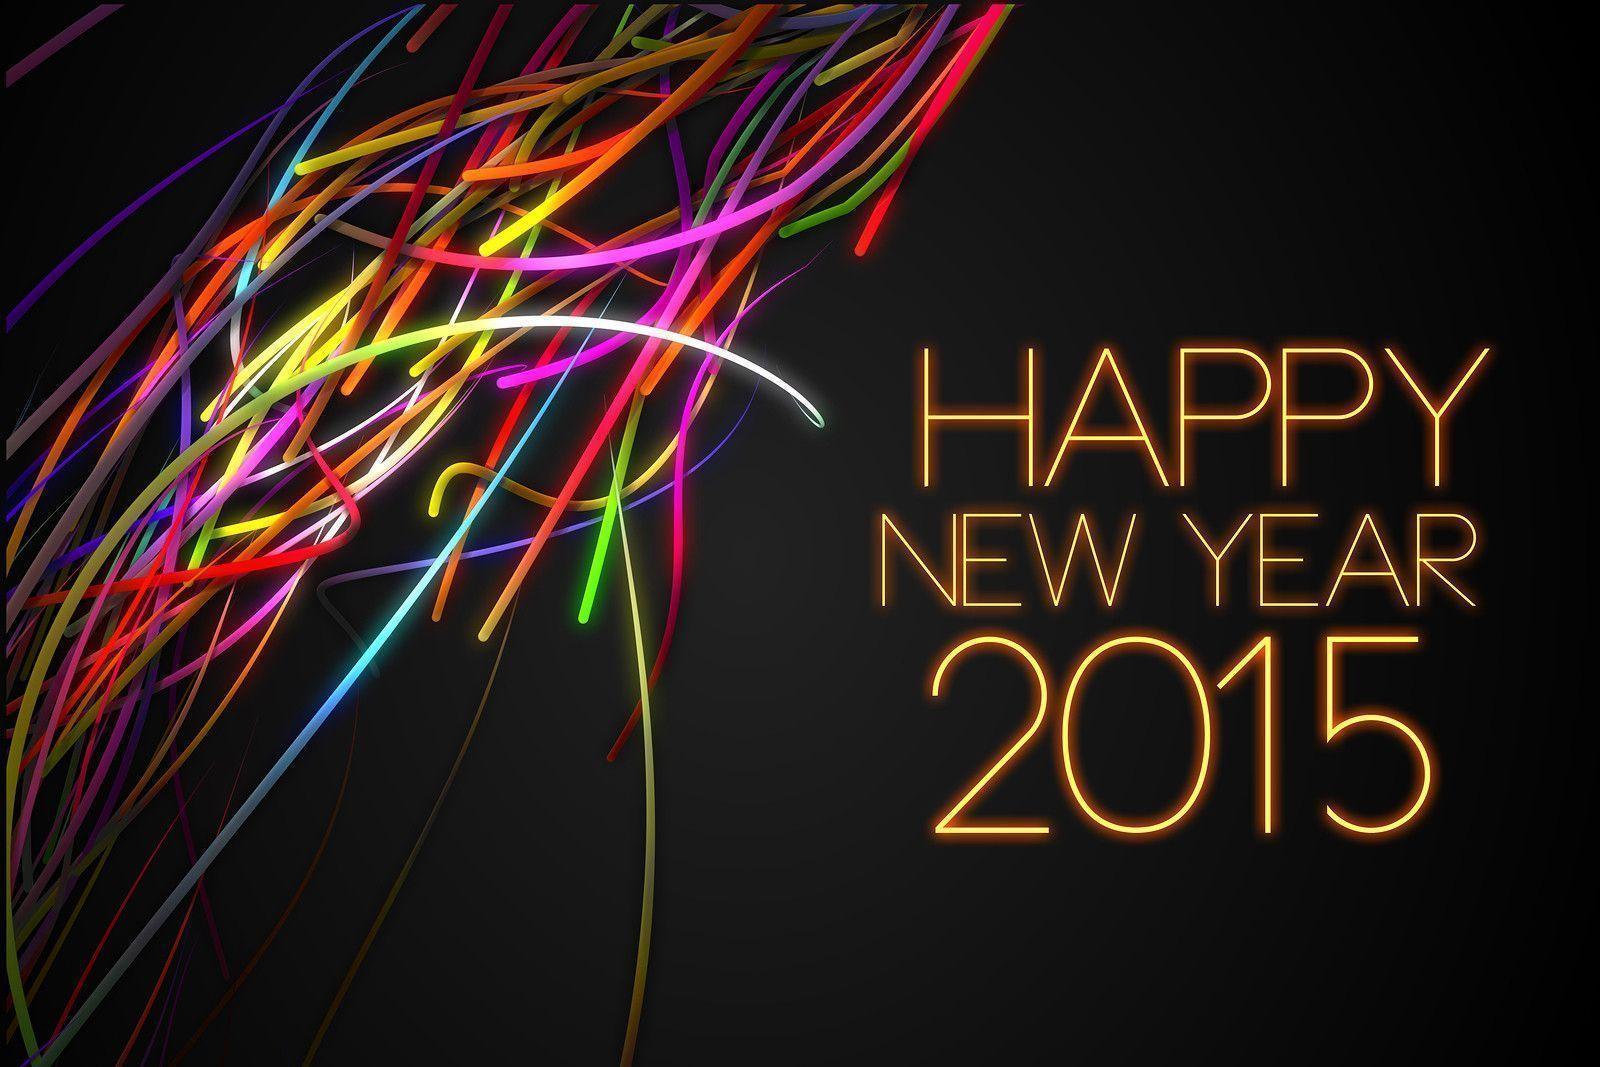 Happy new year 2015 HD mobile wallpaper with quotes